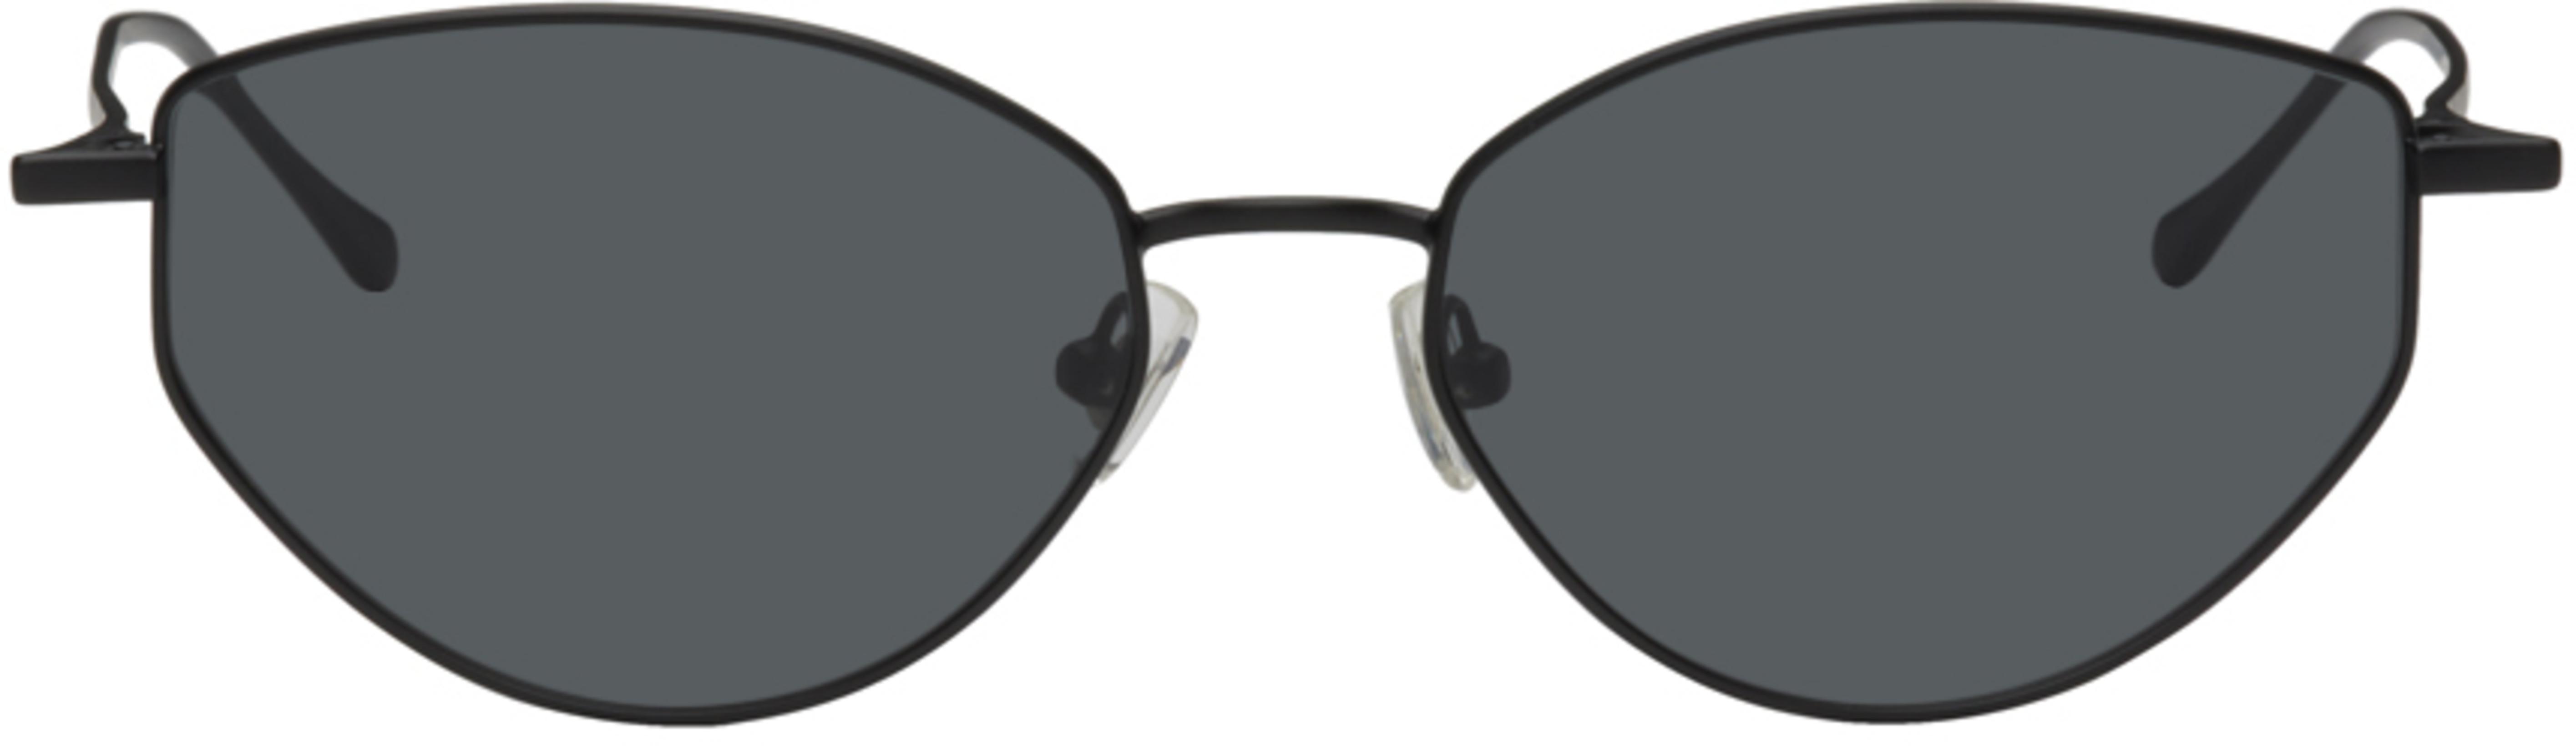 Black Oddity Sunglasses by BONNIE CLYDE